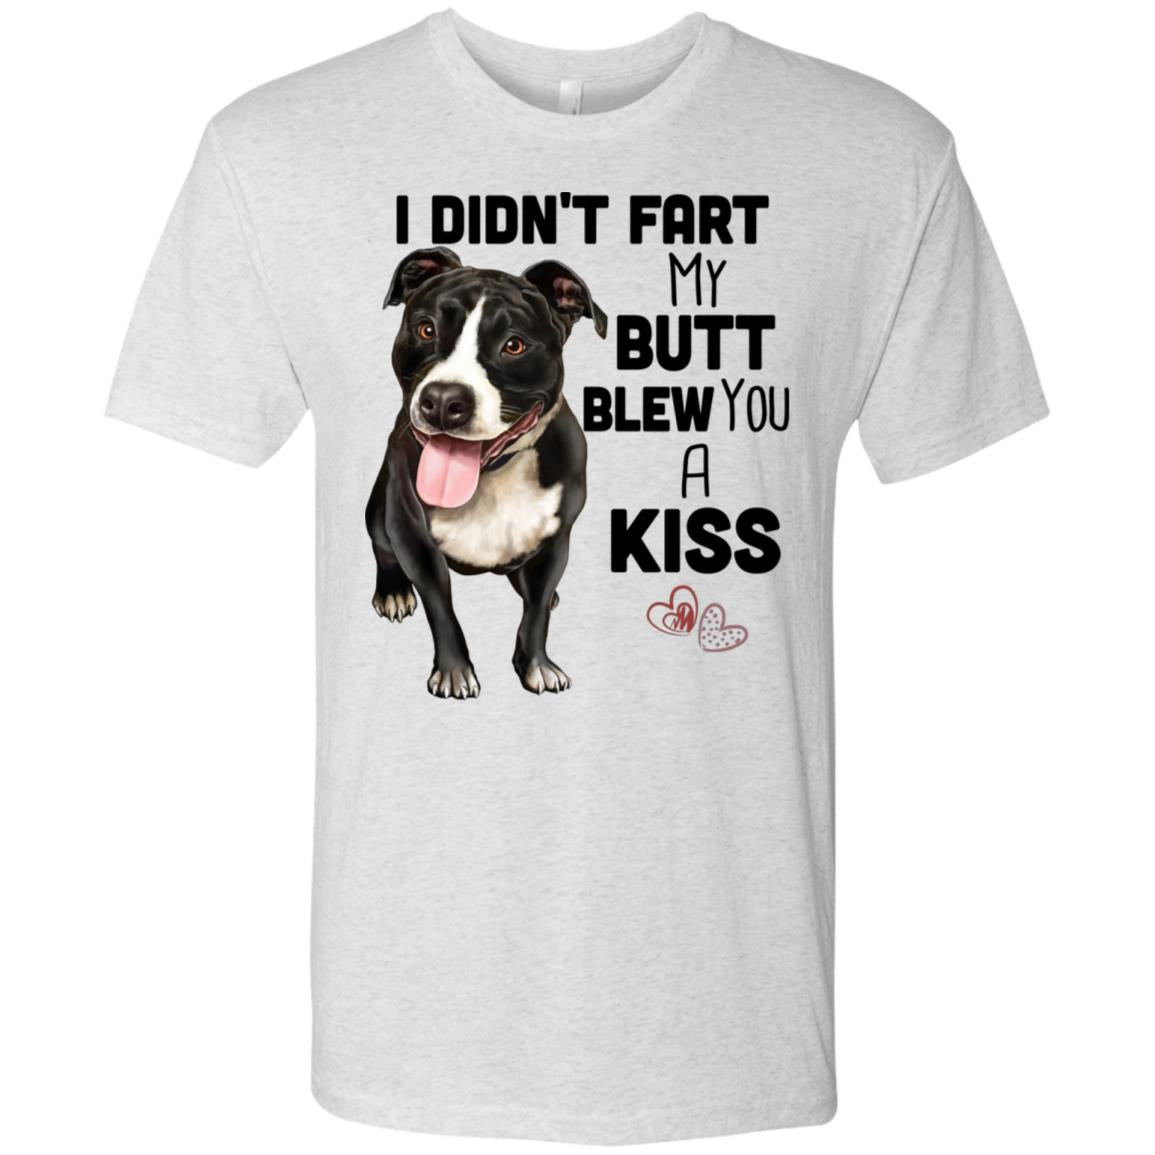 Pit bull T-Shirt for Men, Pit Bull Dad Gifts - I Didn't Fart My Butt Blew You A Kiss - GoneBold.gift